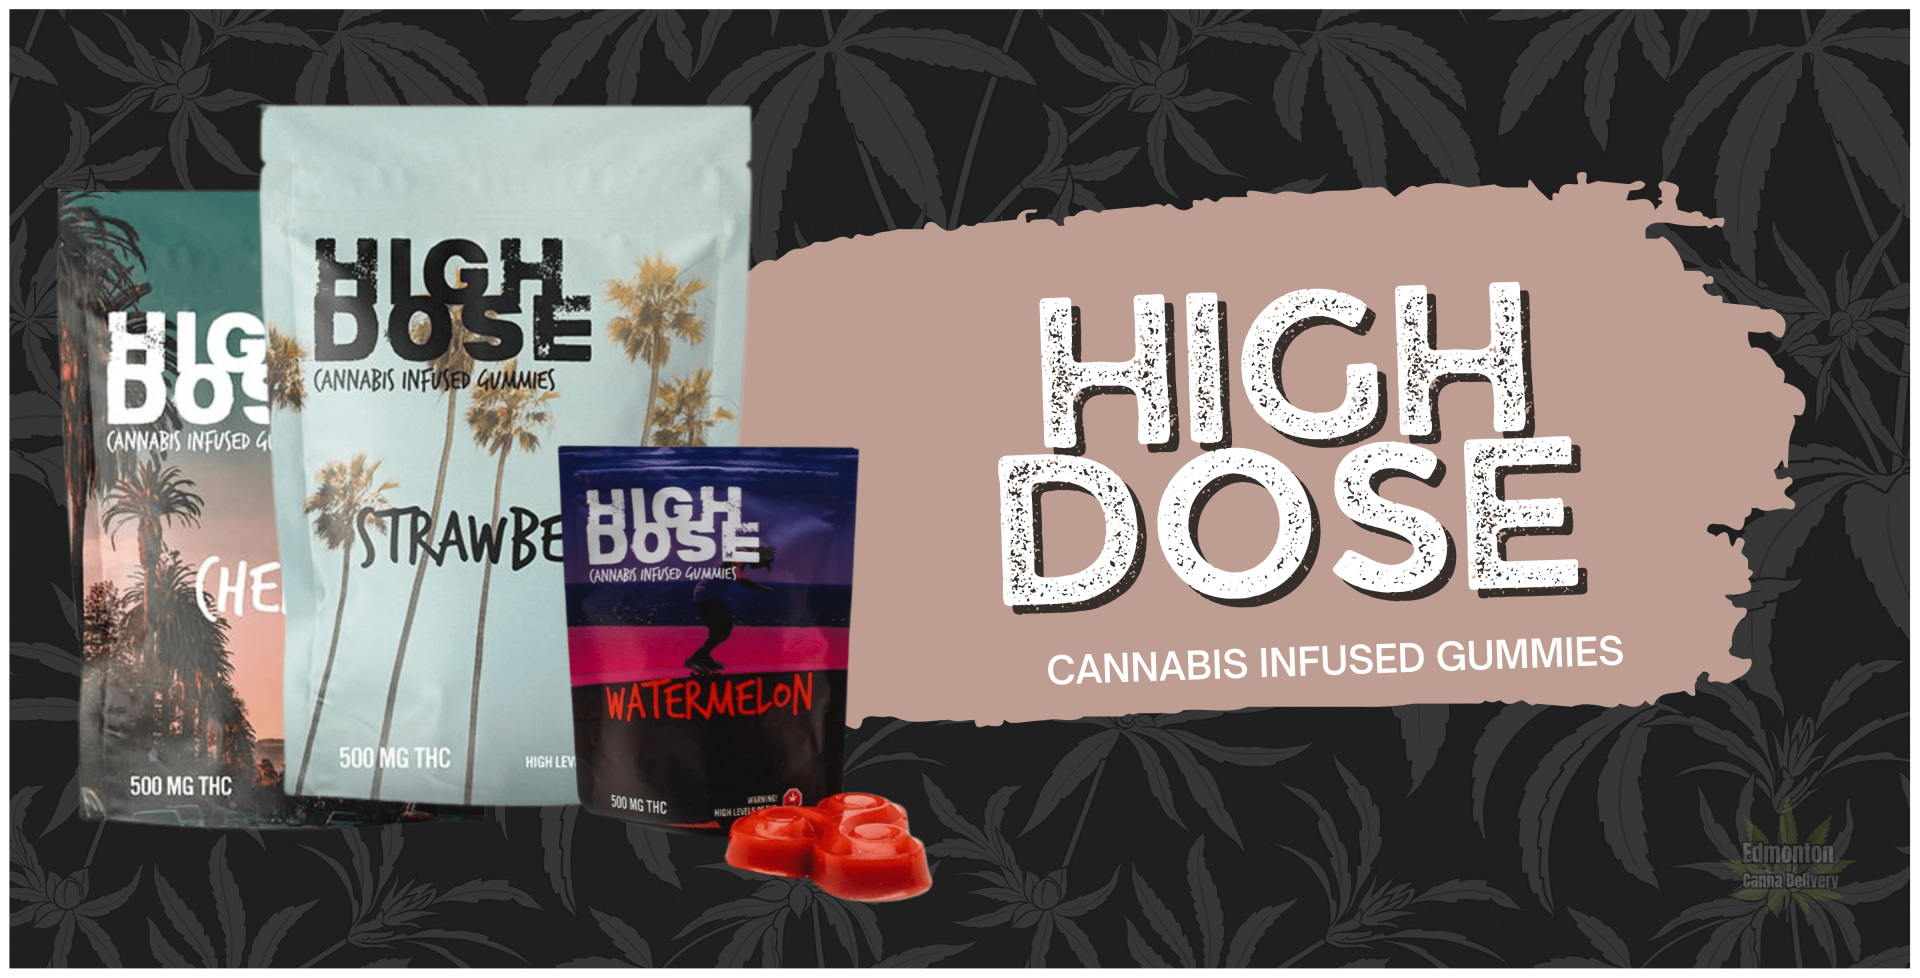 High Dose - Cannabis Infused Gummies Banner